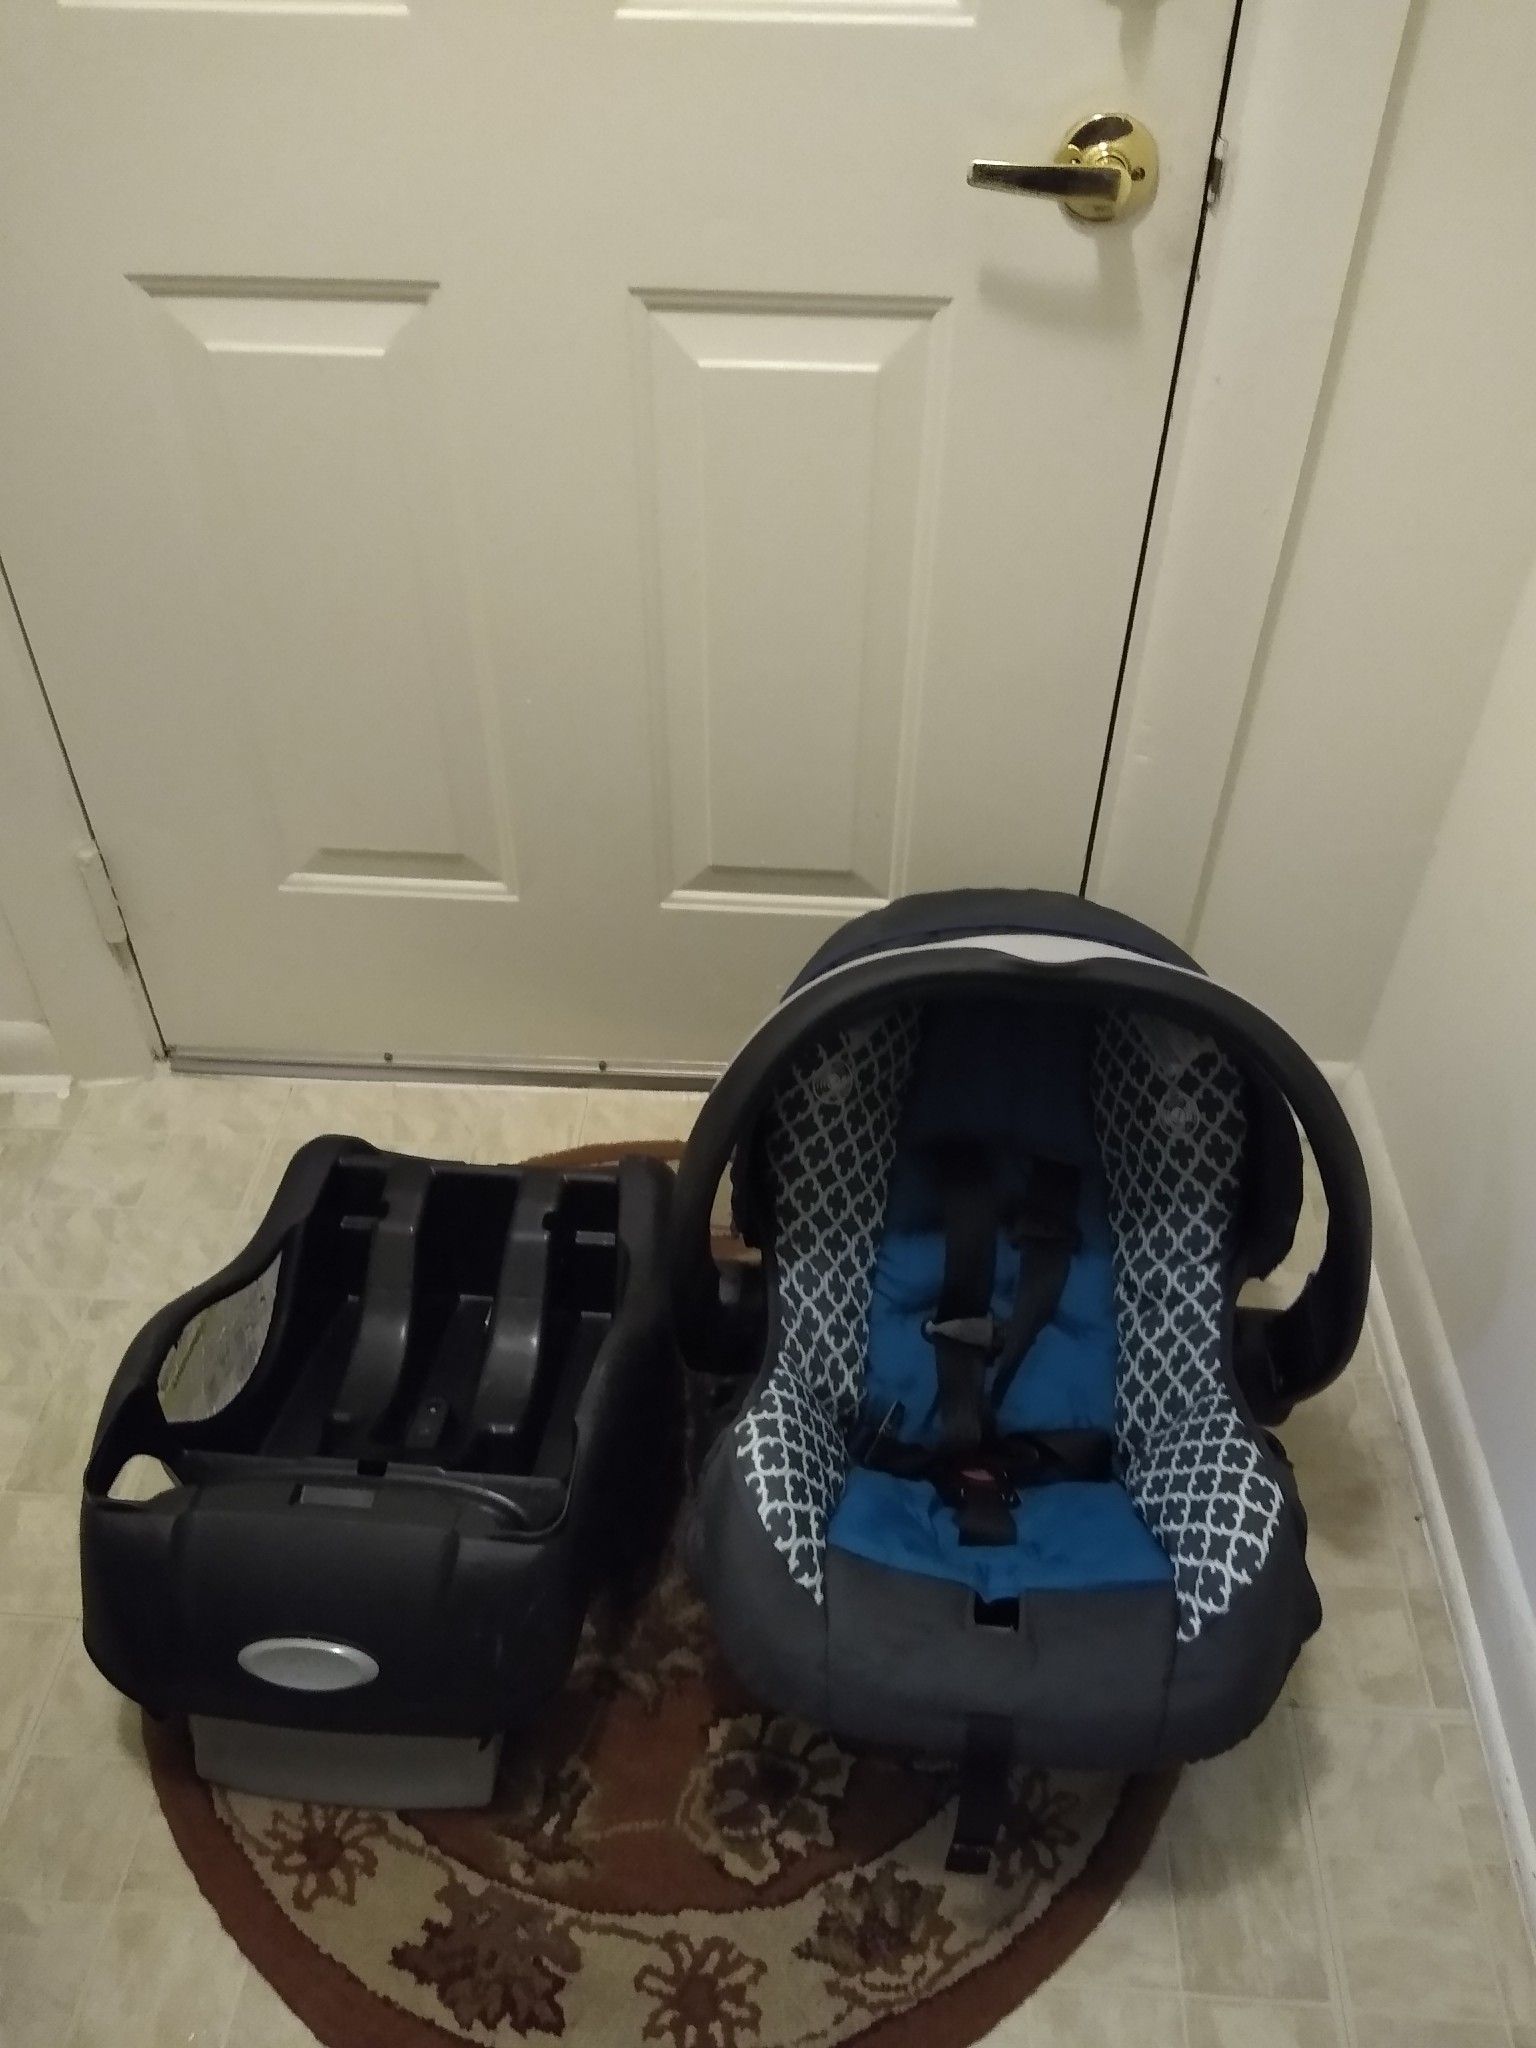 Use Evenflo car seat and one baby carrier both for $40 or offer washed and clean